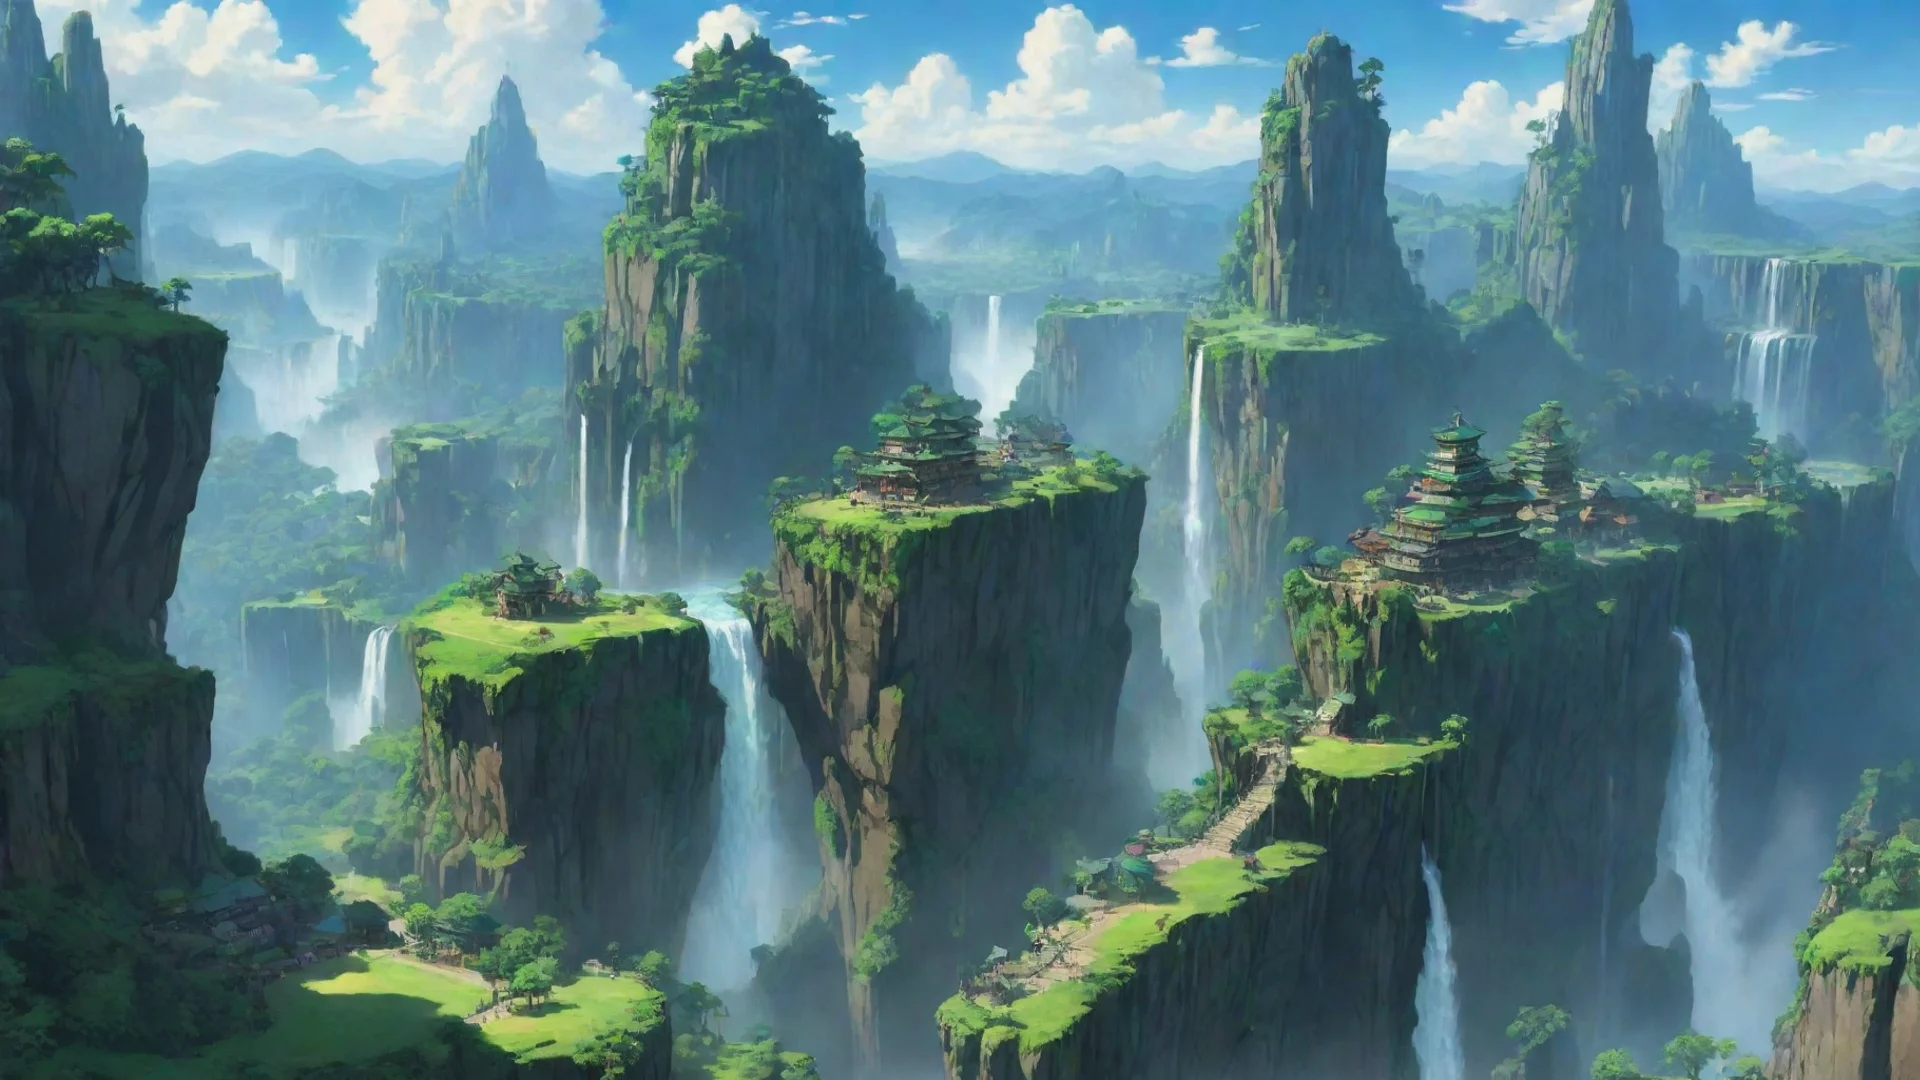 giant green planet in sky anime ghibli city on floating cliffs with waterfalls best hd aesthetic wow wide